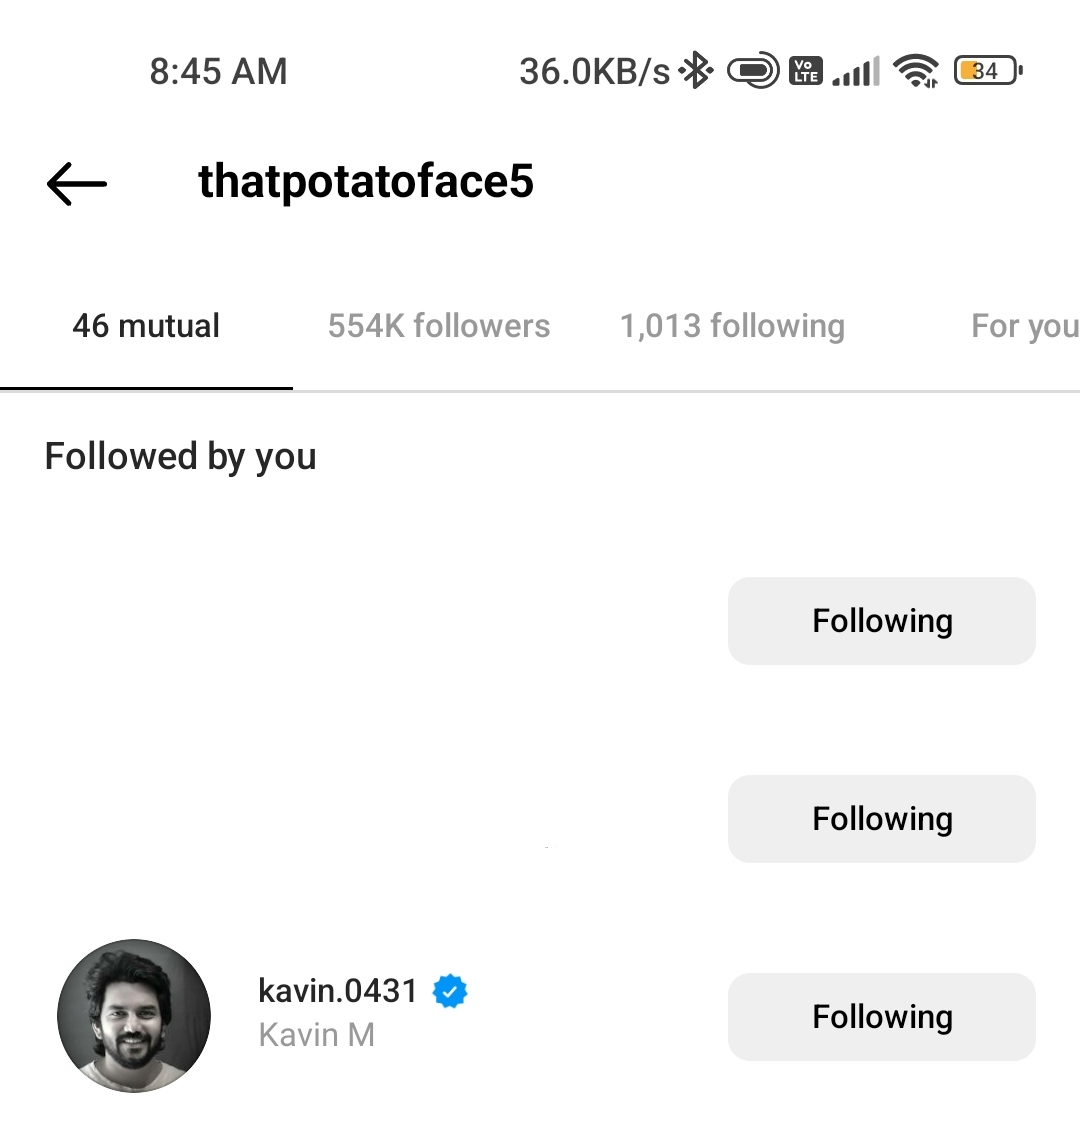 #Kavin followed Pototo face maybe #STARmovie promotion 
That interview would be really a good watch
As Kavin is stuck in ways from 90s and
She is attached to new trends 
#Star ⭐